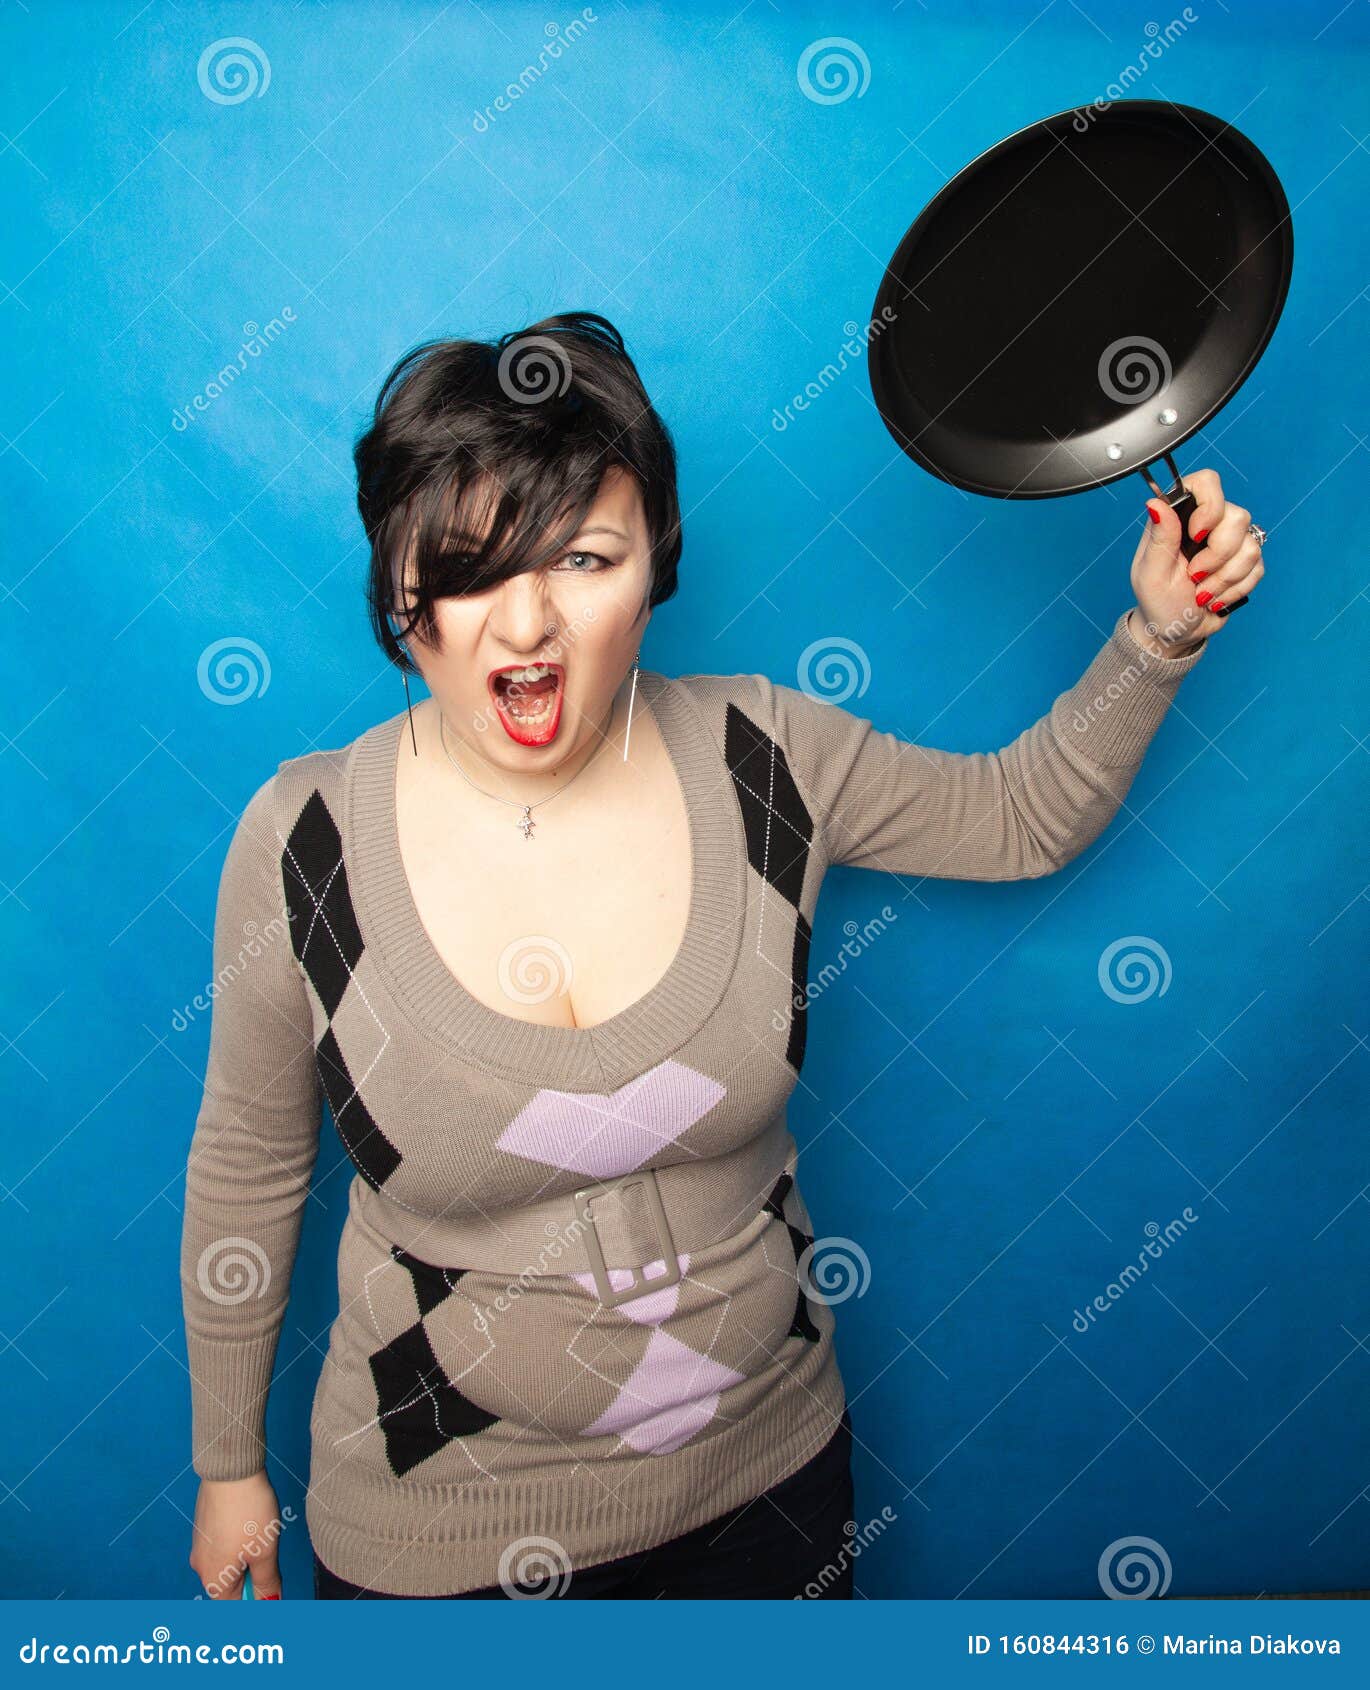 Albums 90+ Images woman beats woman with frying pan on facebook Stunning